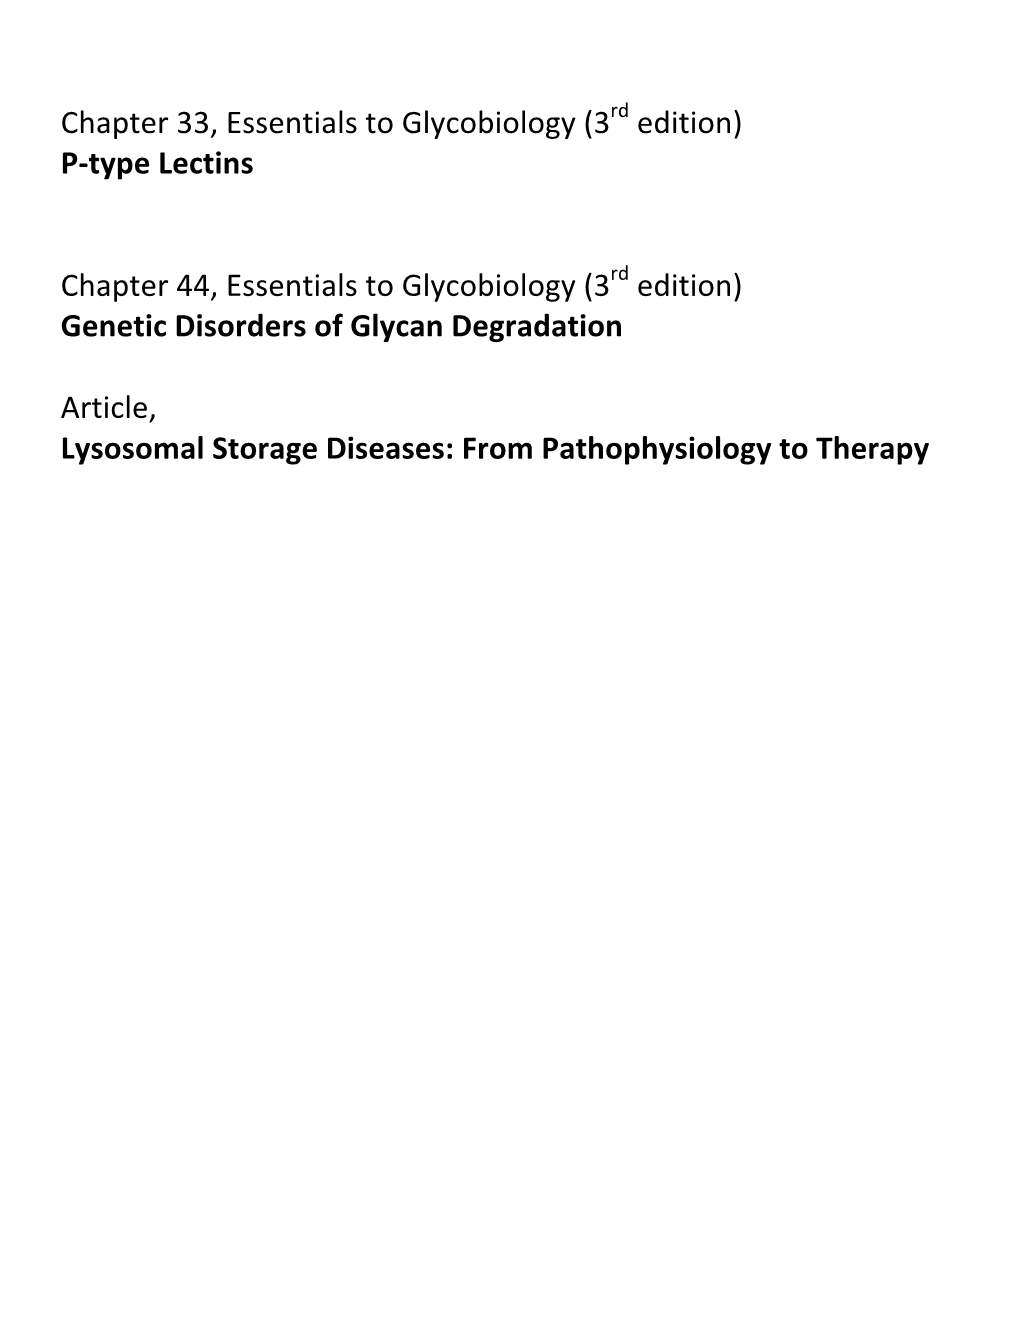 Chapter 33, Essentials to Glycobiology (3Rd Edition) P-Type Lectins